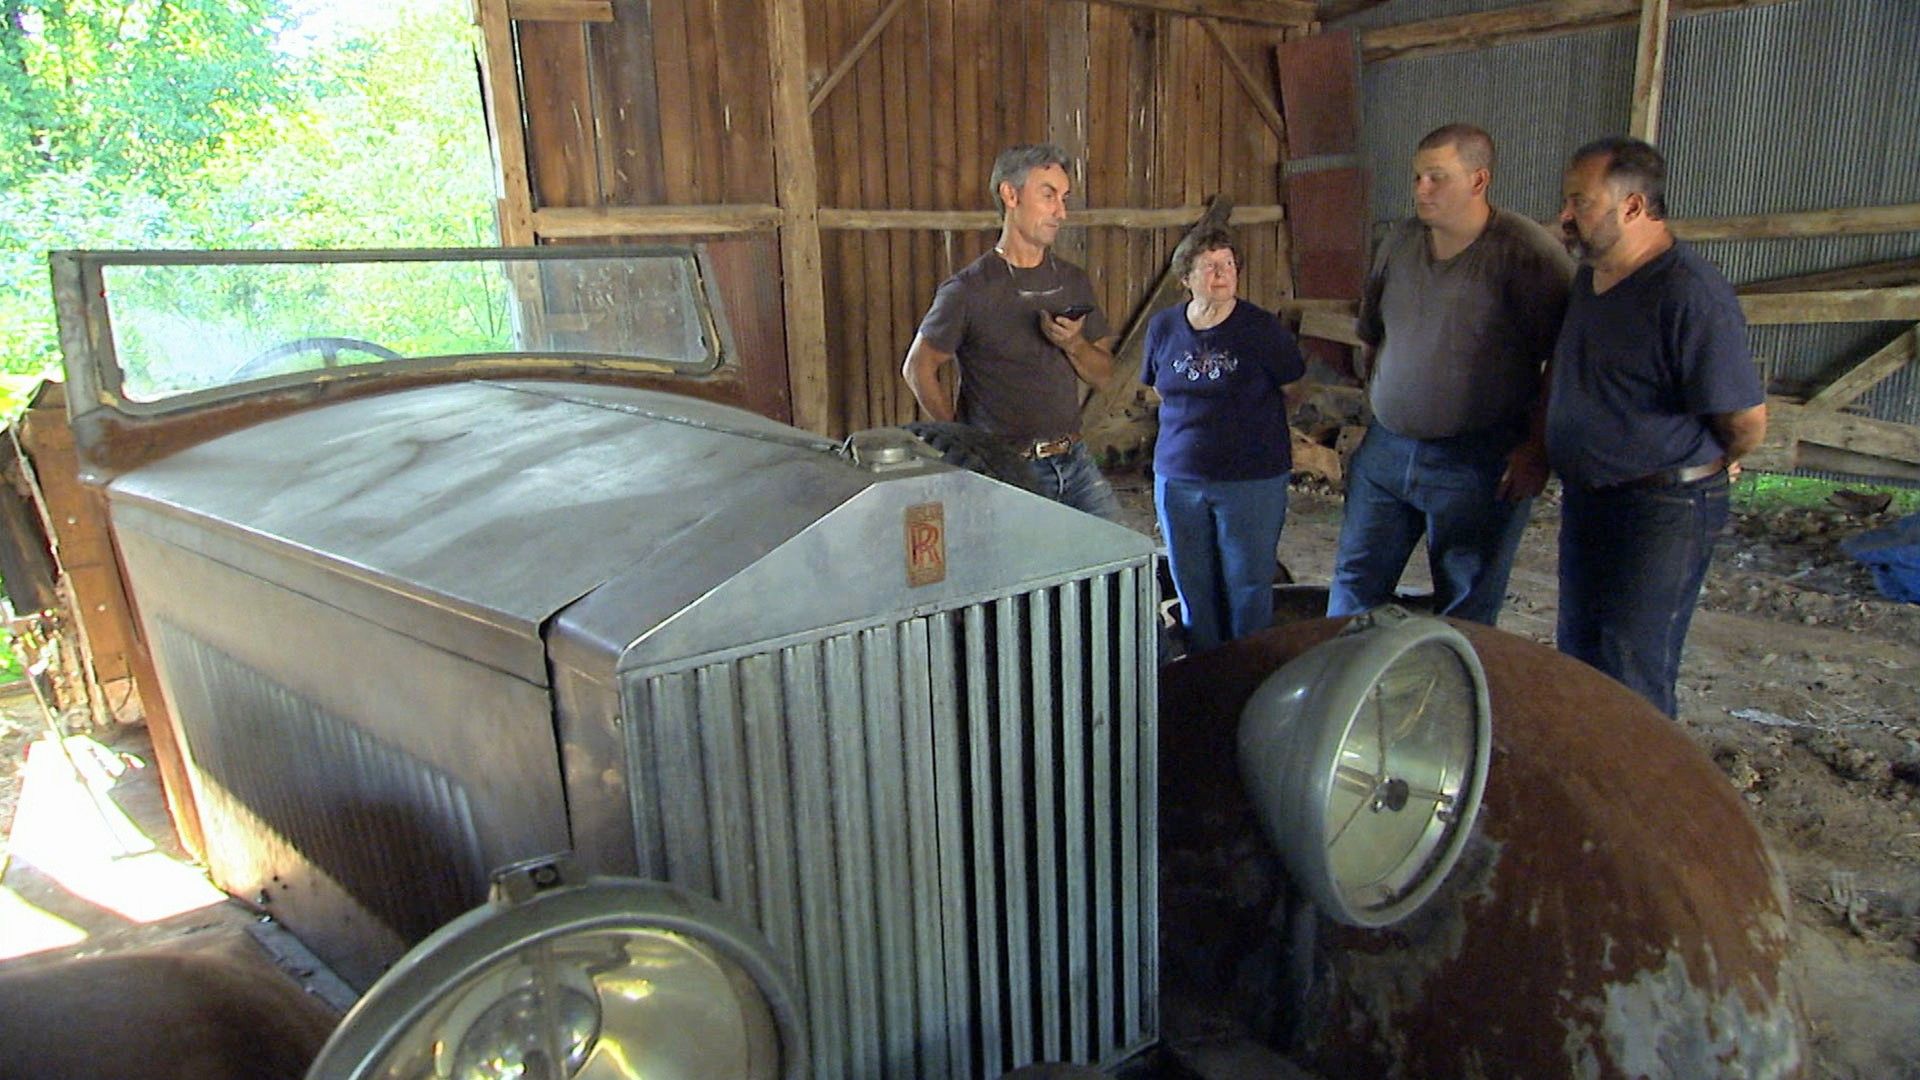 American Pickers background